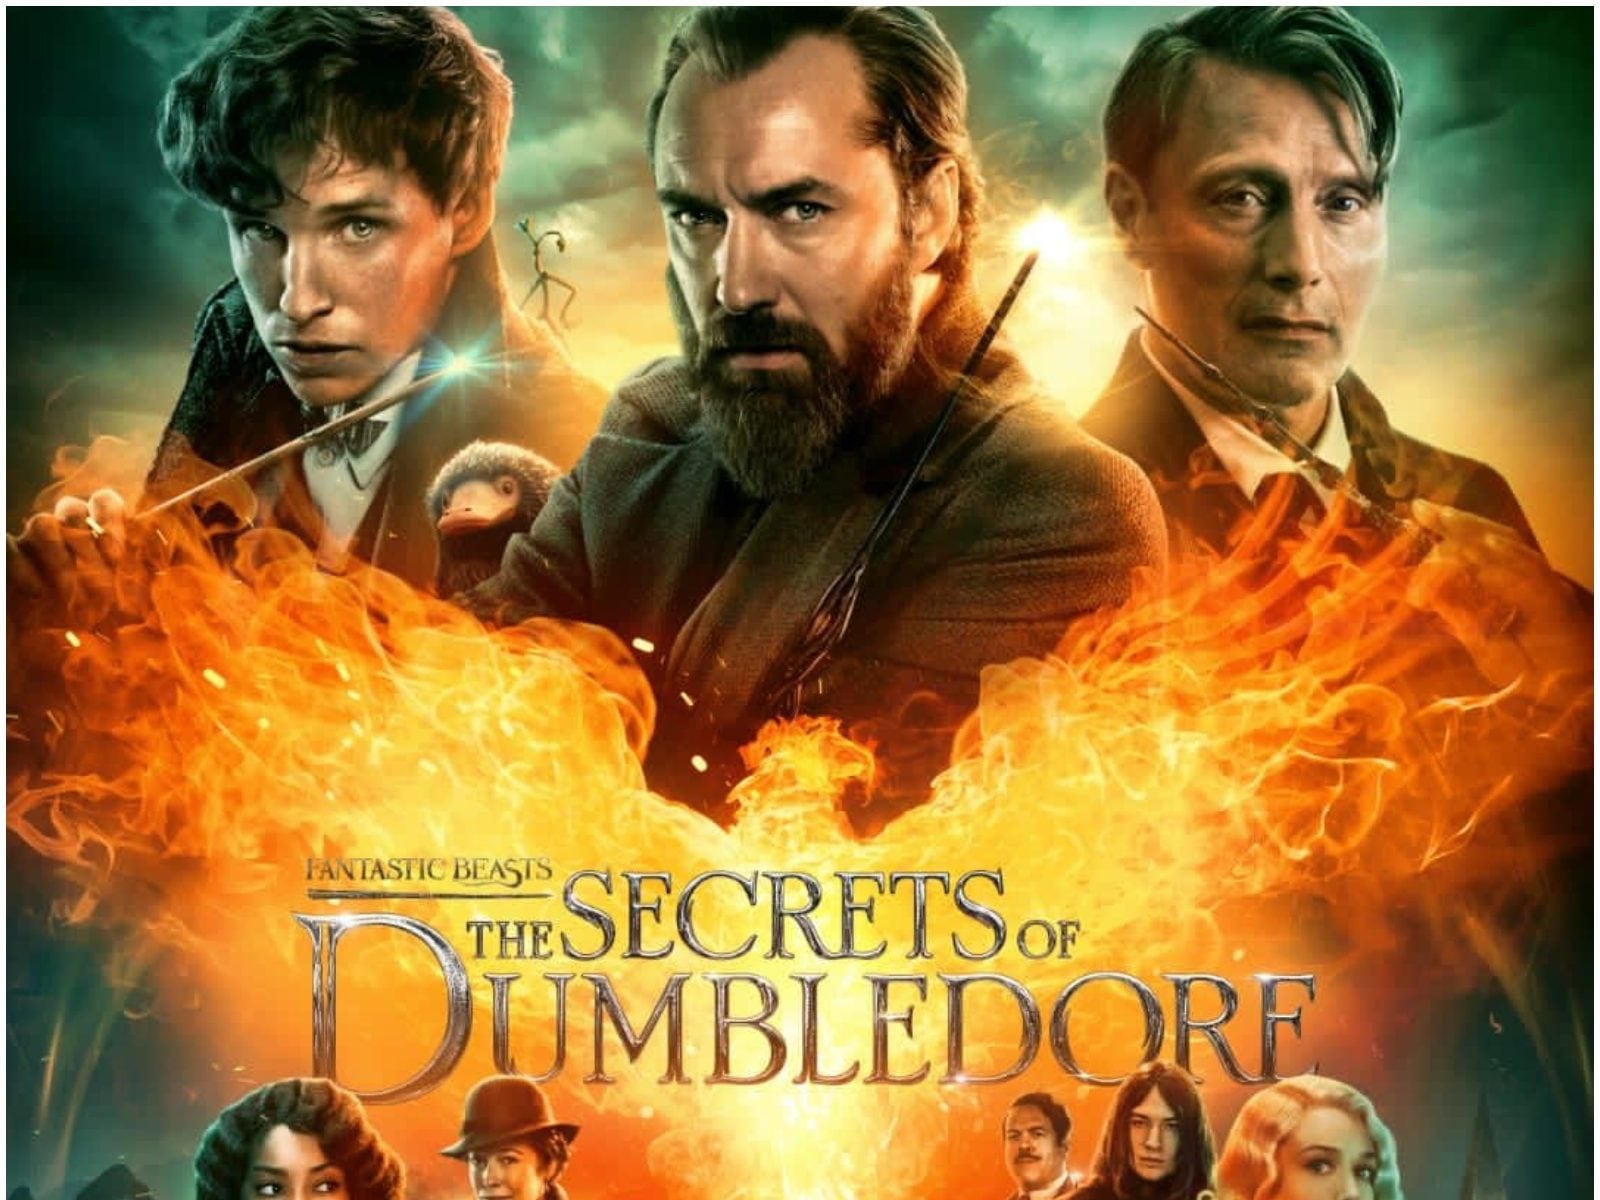 Fantastic Beasts The Secrets of Dumbledore Review: Mads Mikkelsen, Jude Law's Film a Treat Only for Potterheads